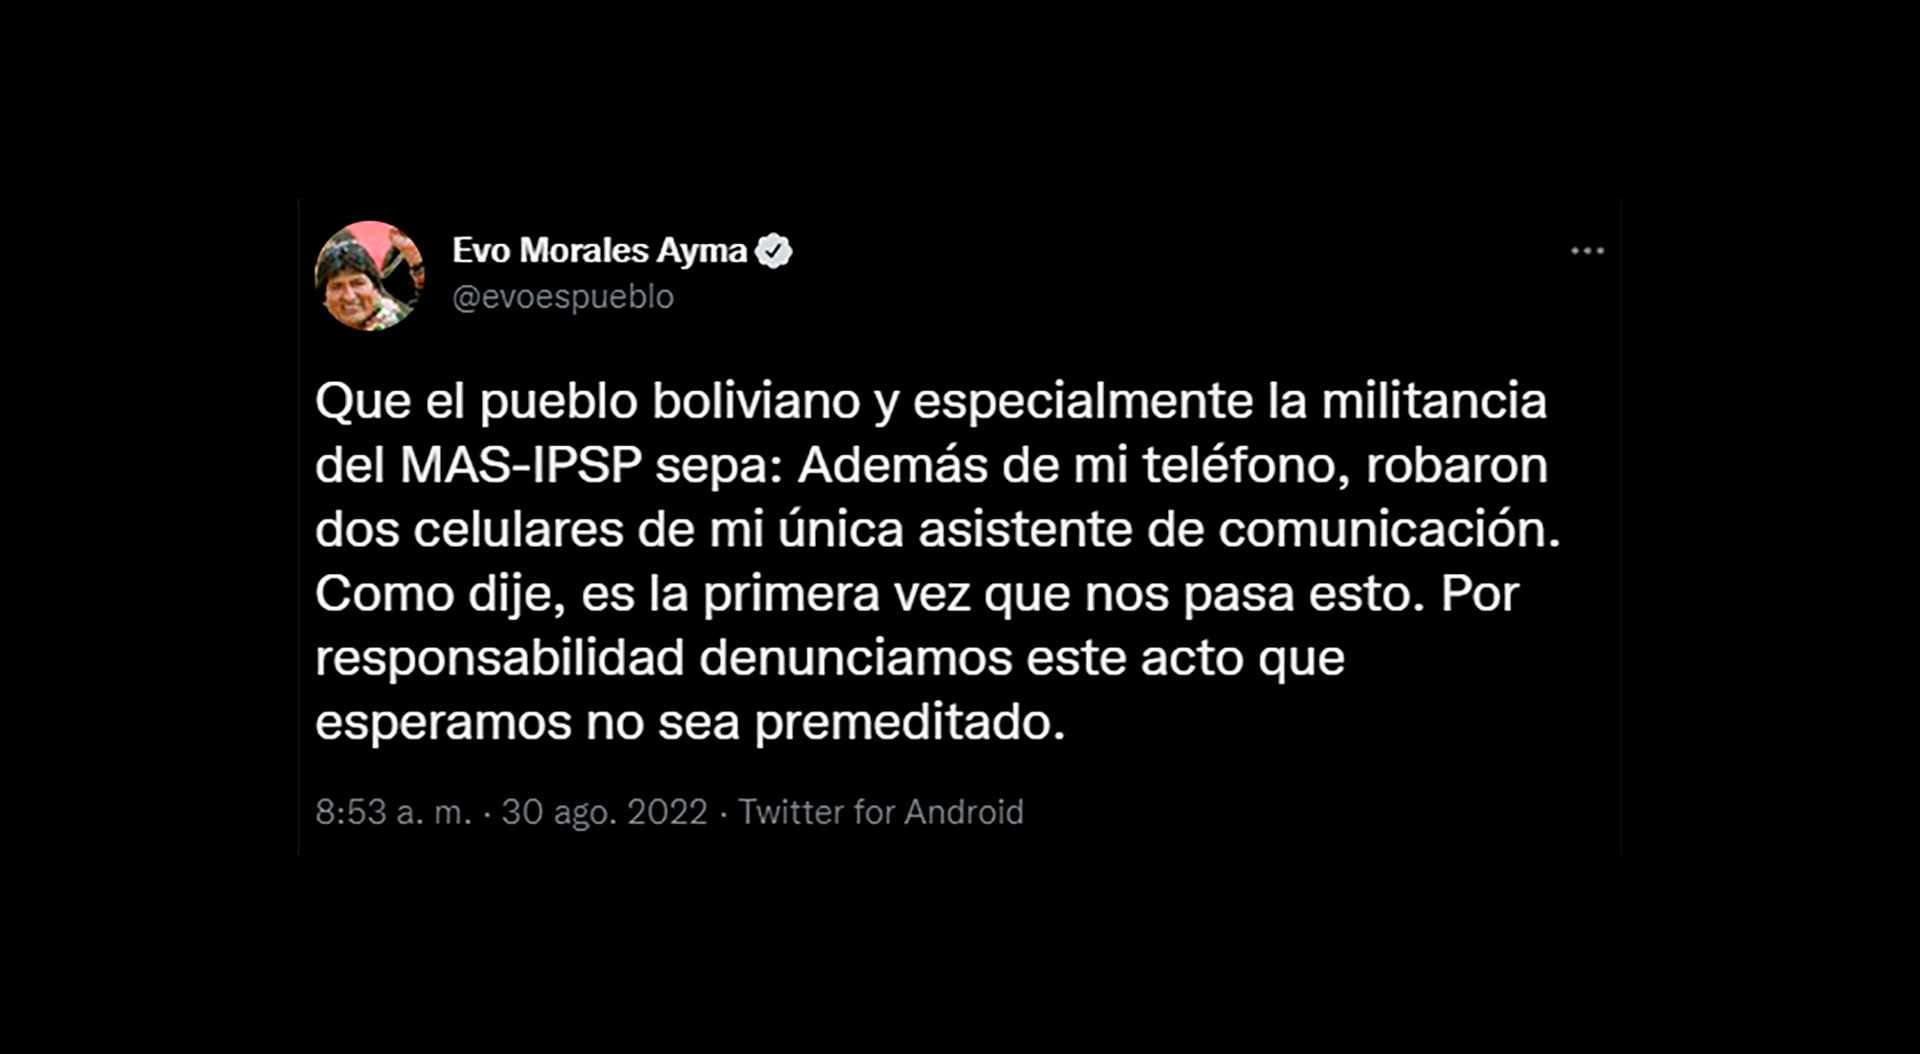 Evo Morales' message on Twitter